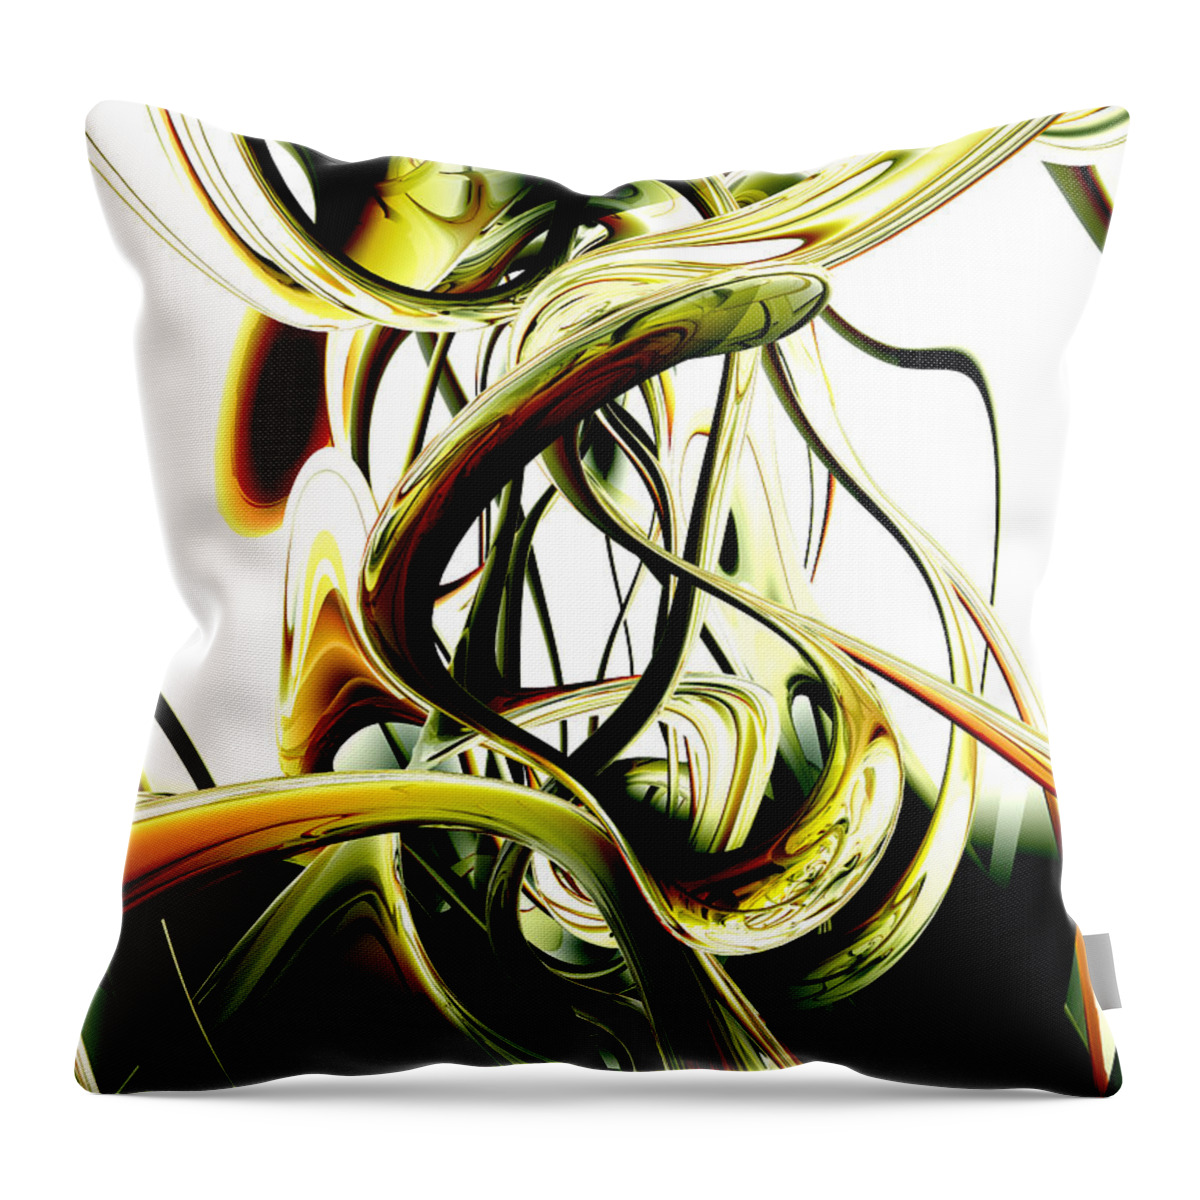 3d Throw Pillow featuring the digital art Fanciful Abstract by Alexander Butler